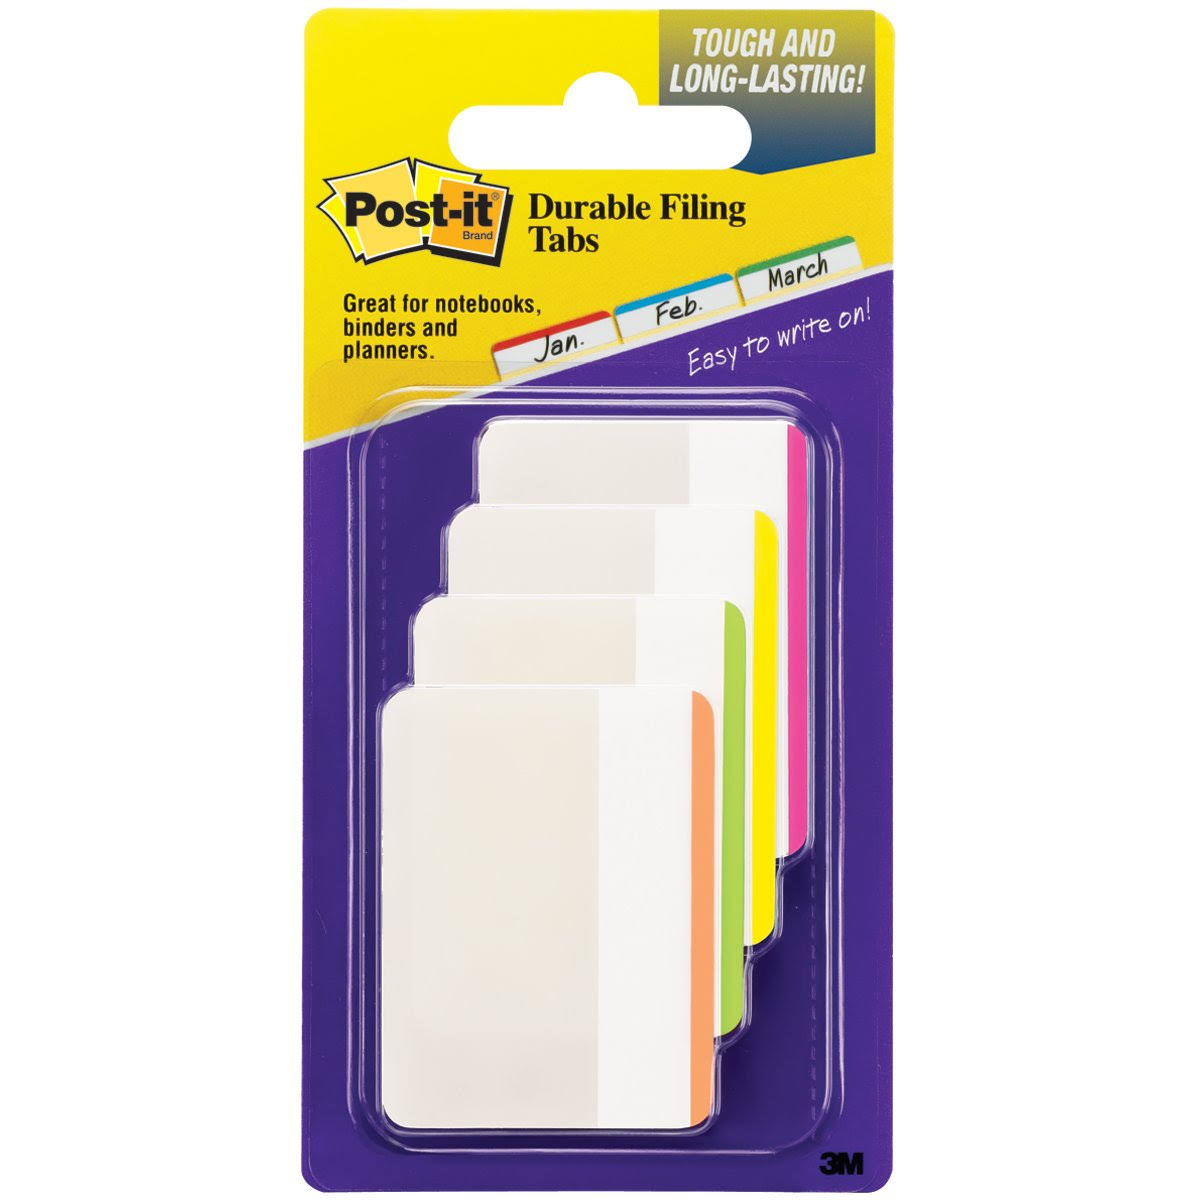 Post it Durable Filing Tabs - Assorted Colors, 2" x 1.5"